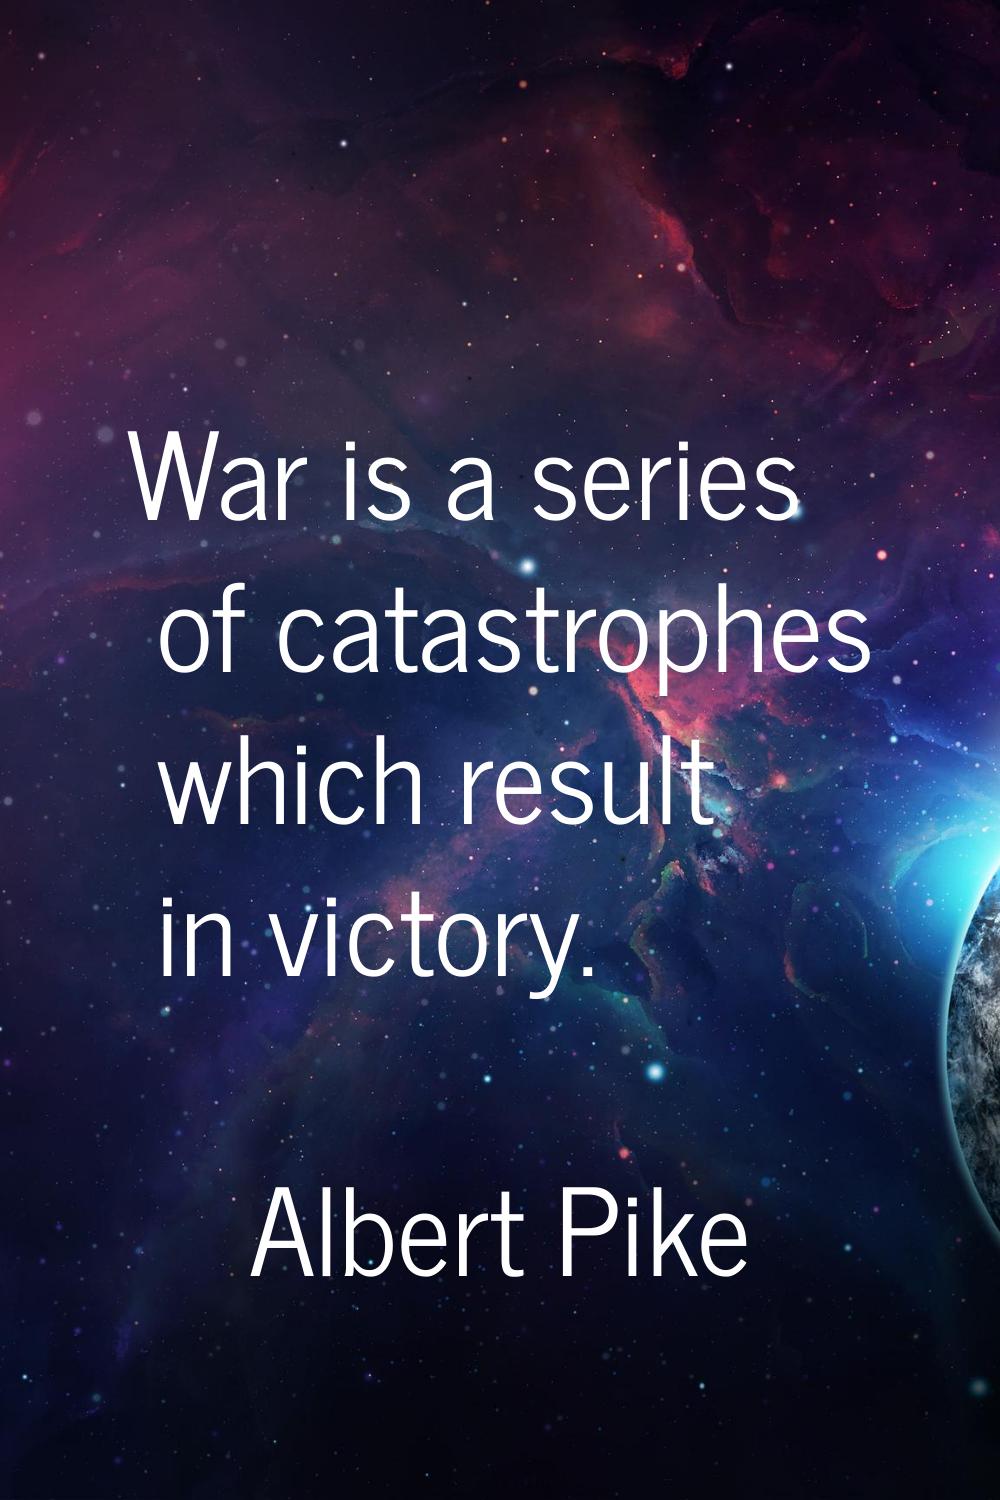 War is a series of catastrophes which result in victory.